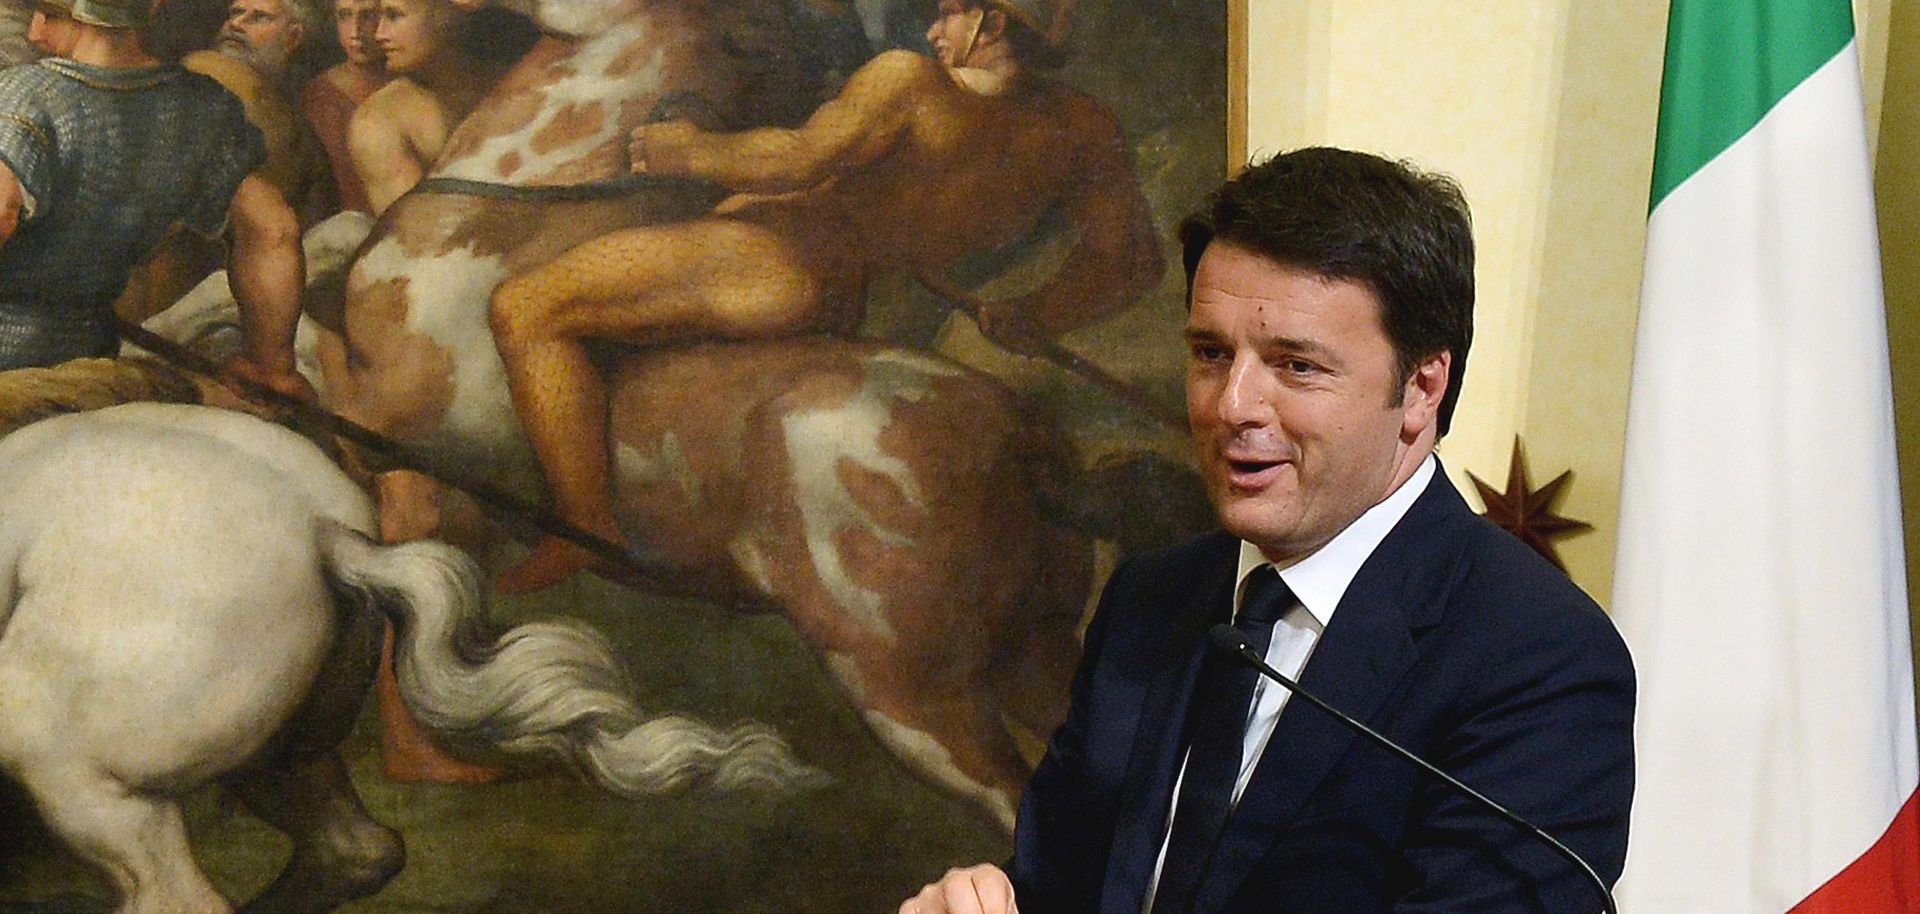 Italy's Ruling Party Wins A Disquieting Victory